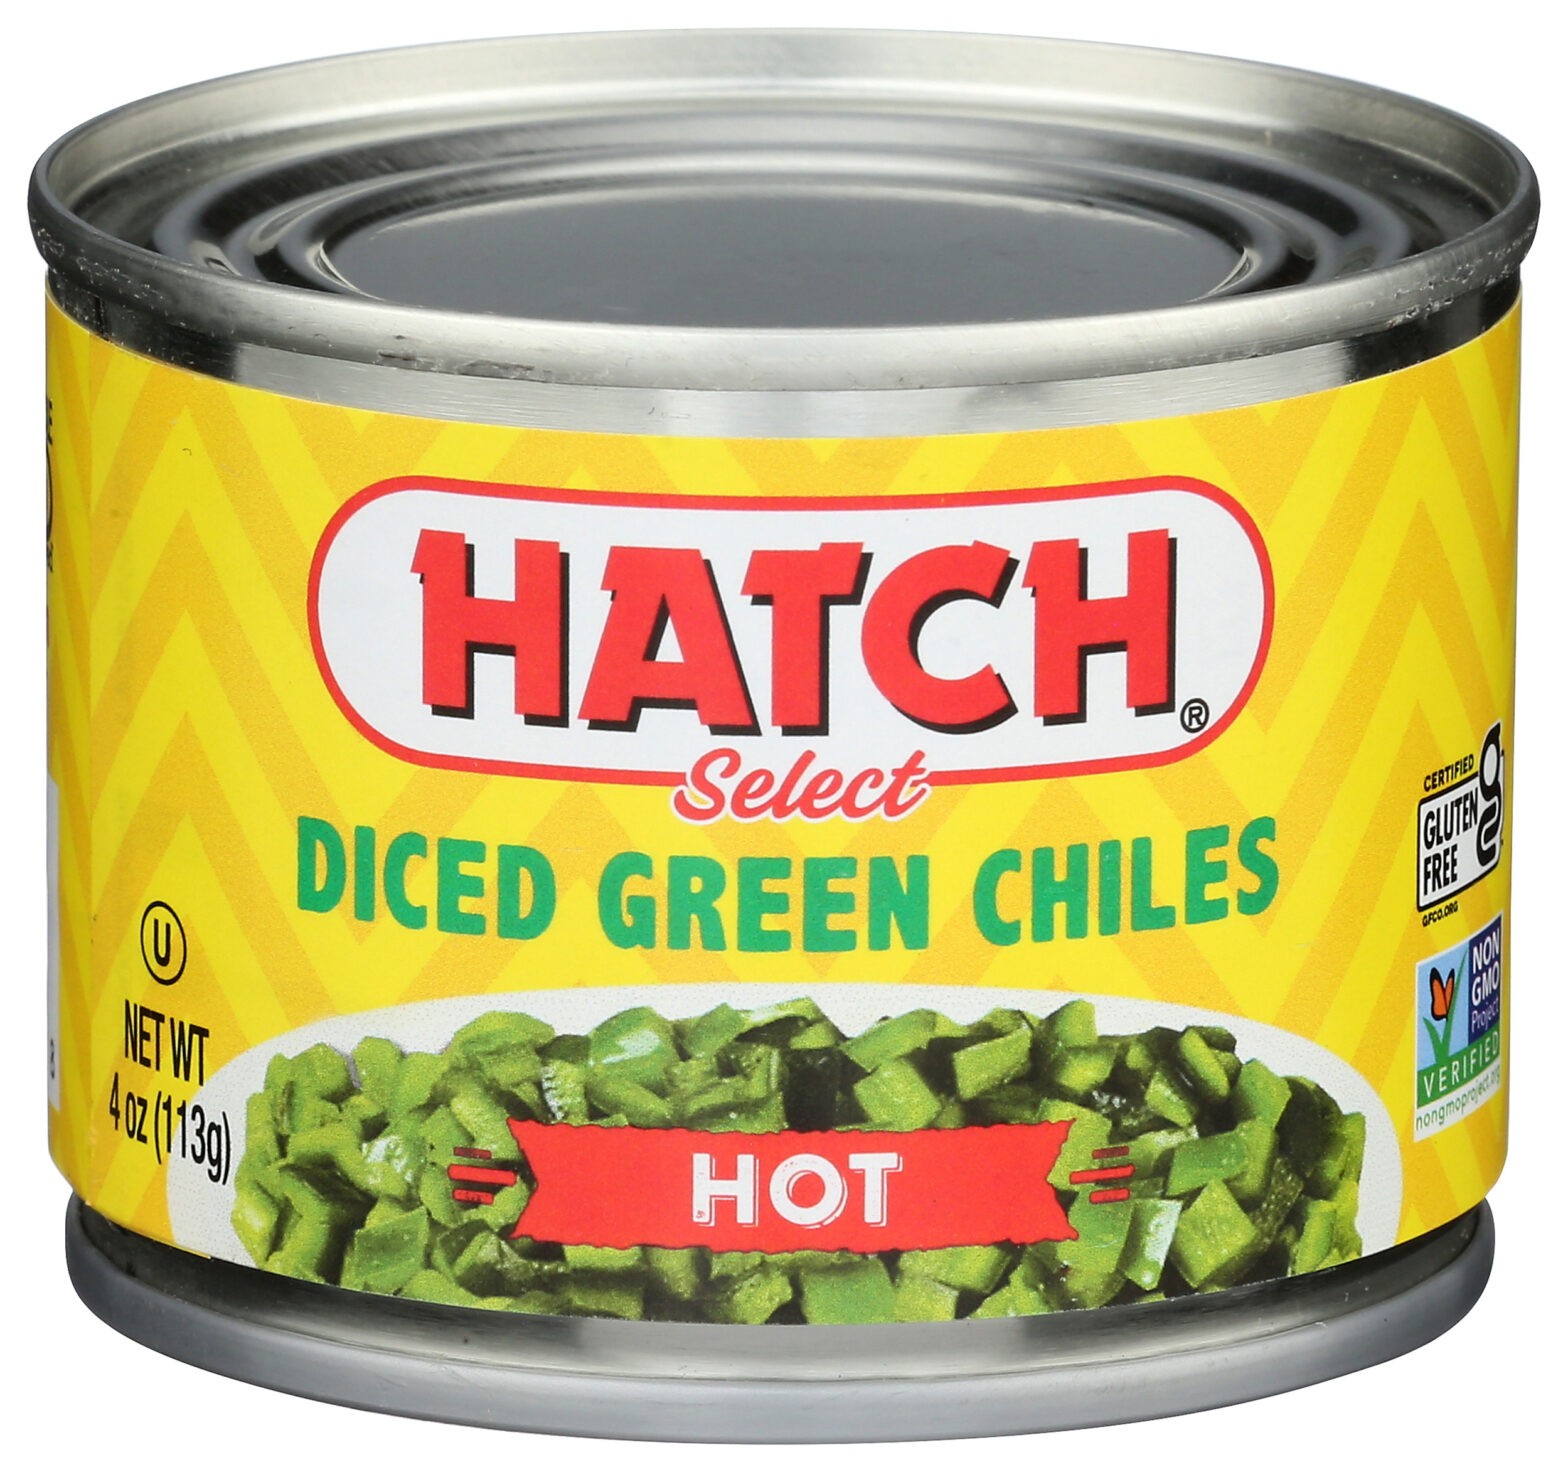 Featured image for post: Diced Green Chiles